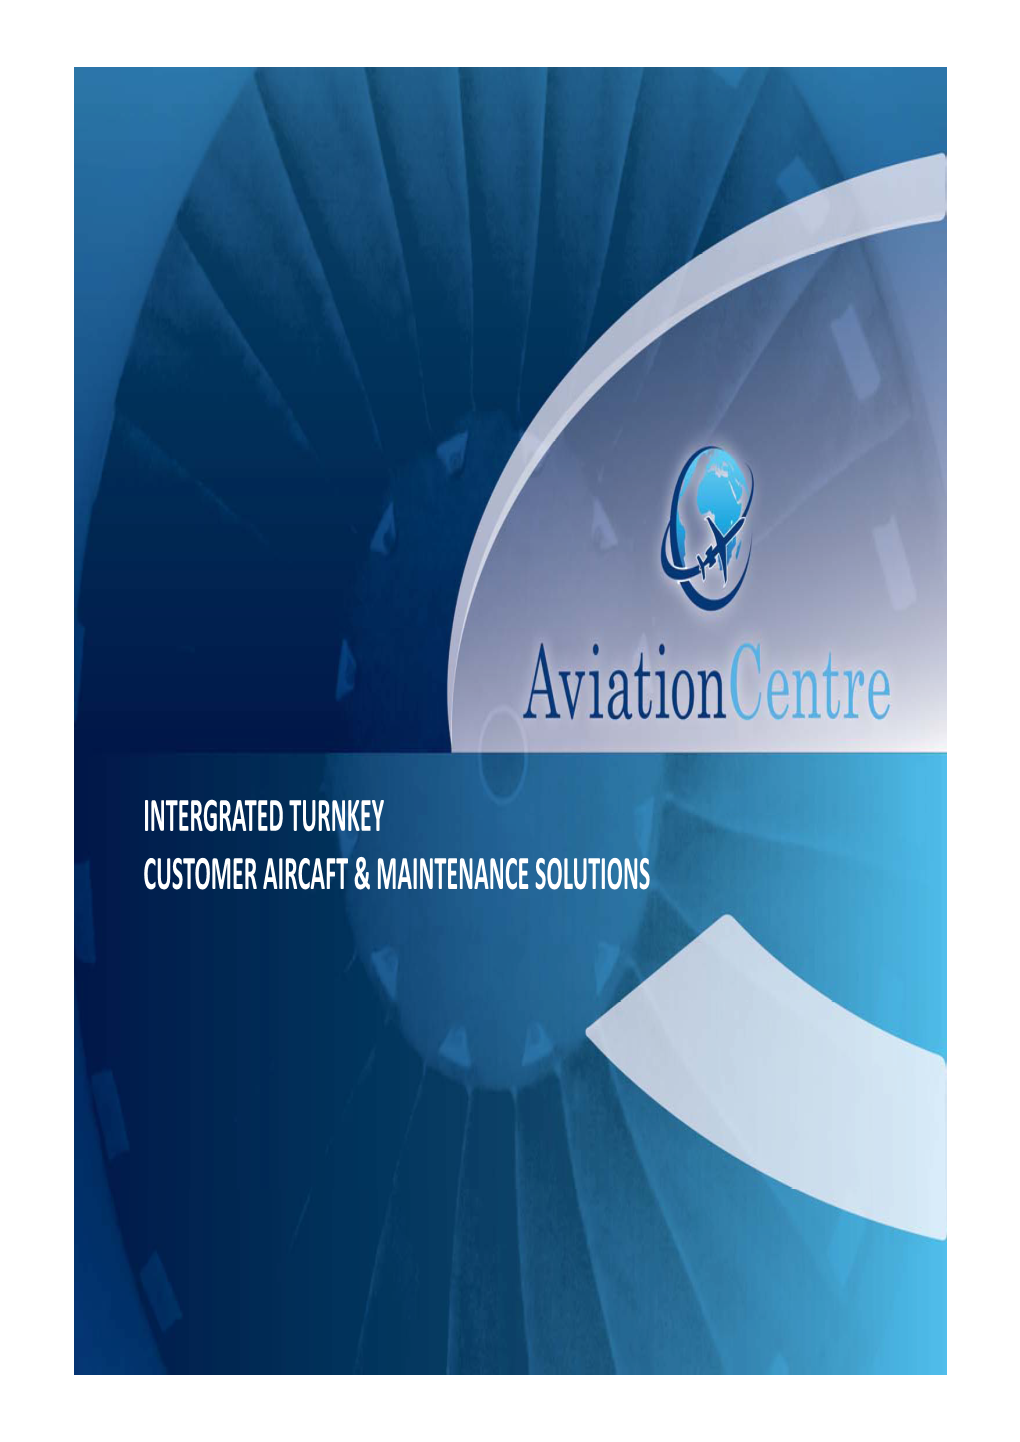 Aviation Centre Intergrated Turnkey Aircaft